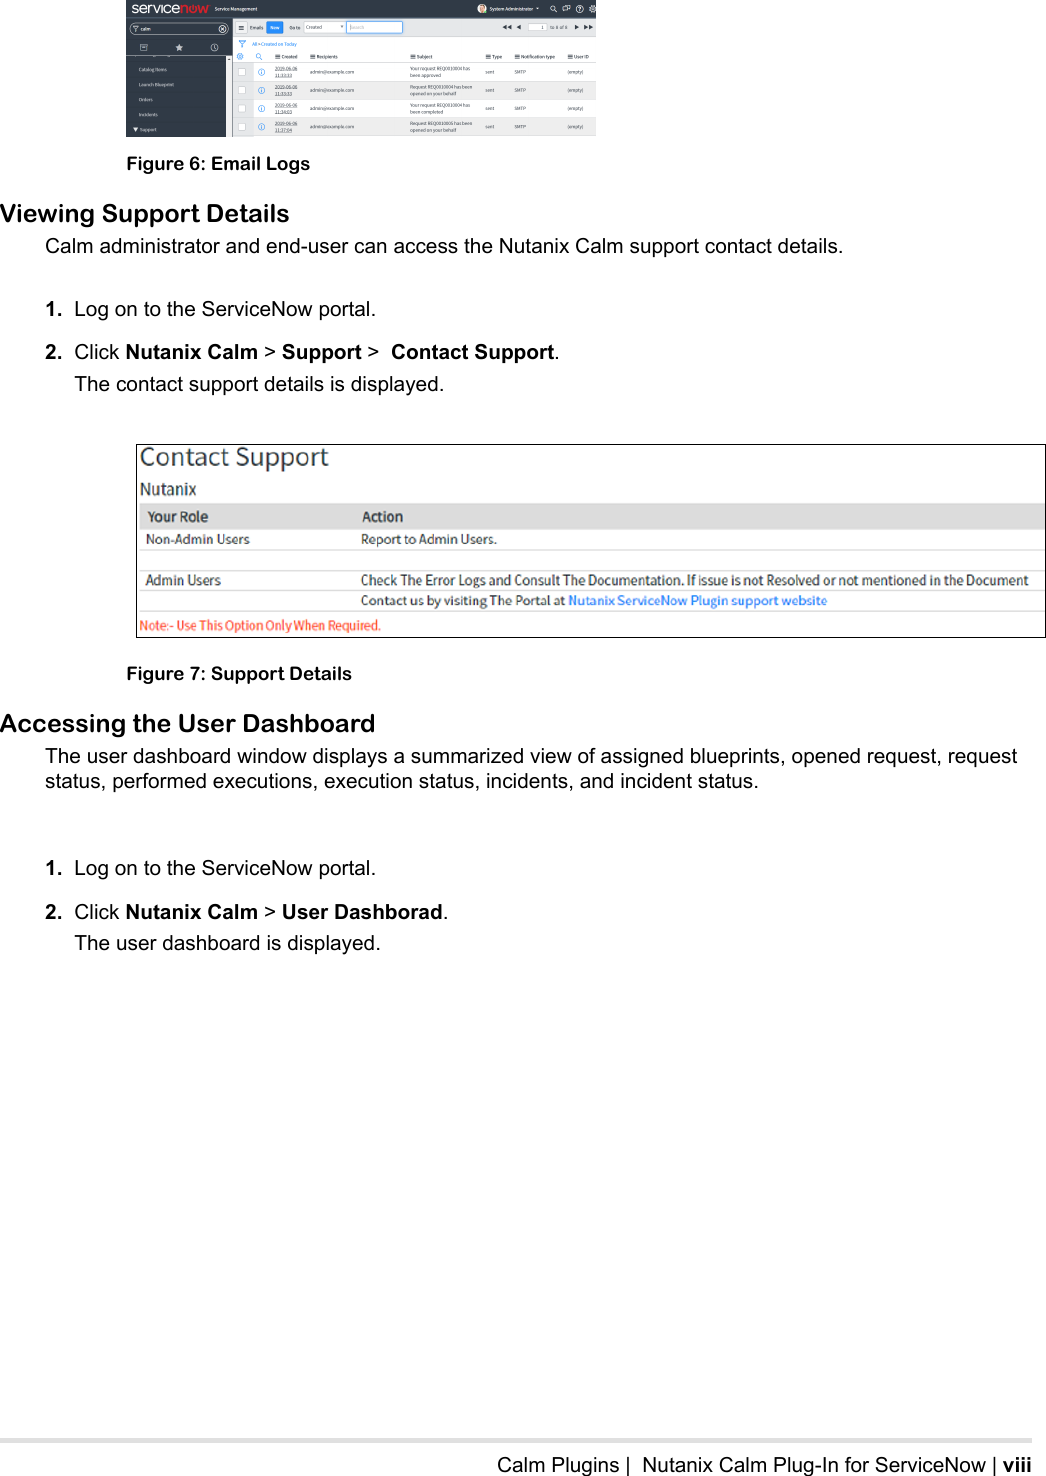 Page 8 of 9 - ServiceNow Calm Plug-In User Guide Calm-Service Now-Plug-In-User-Guide-v1.0